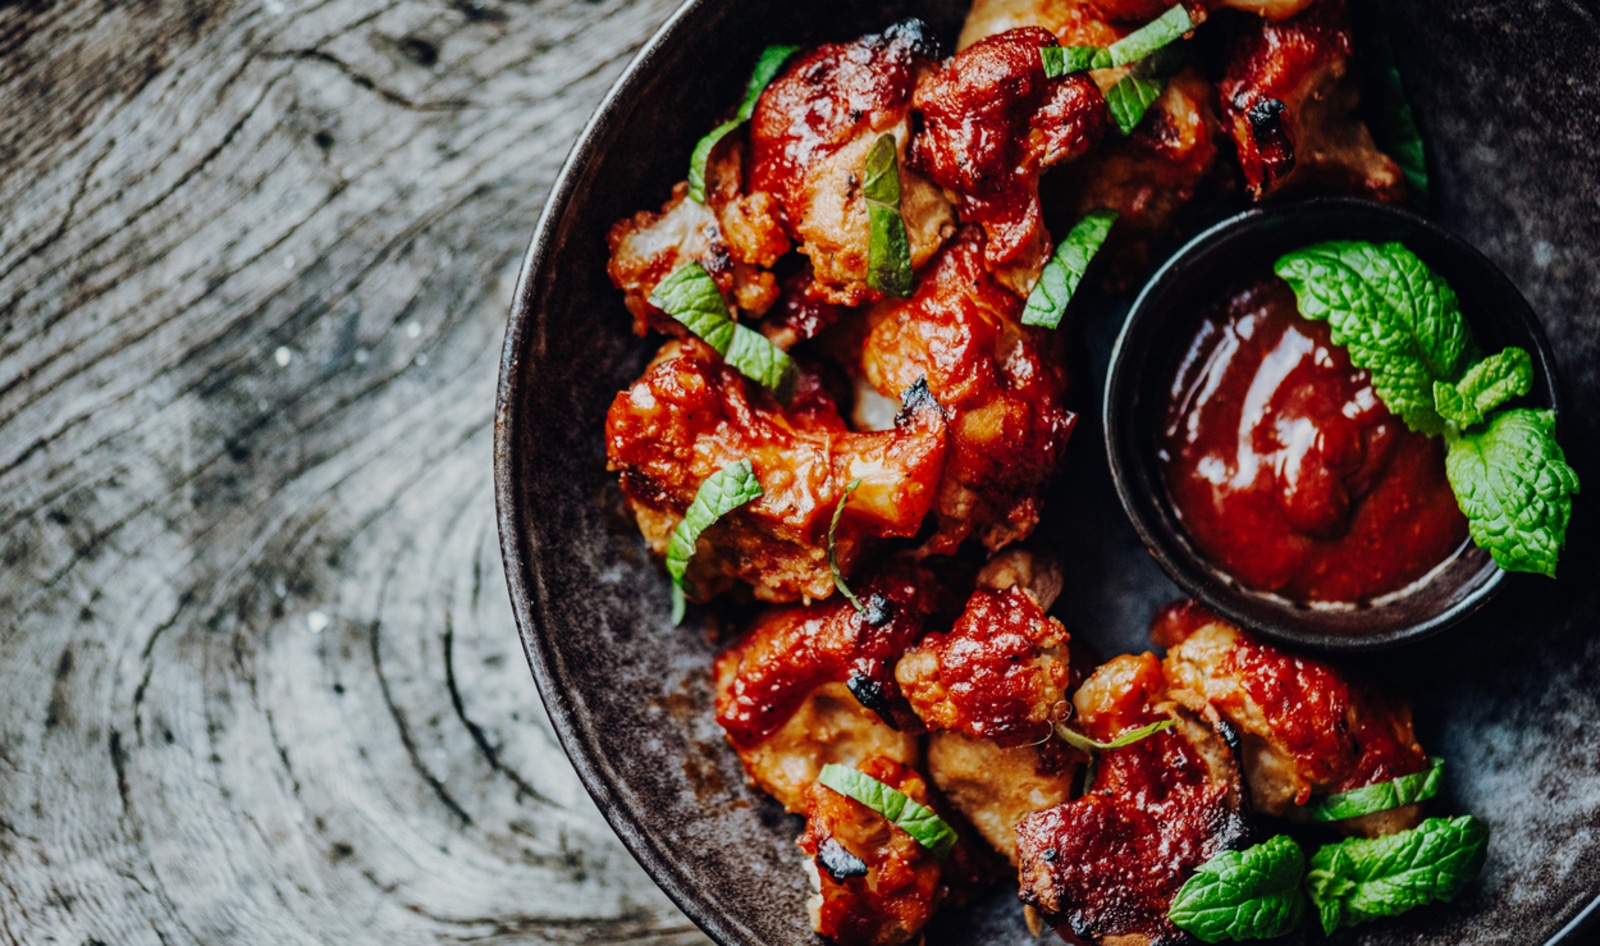 Game Day Prep: 11 Delicious Sauces to Pair With Wings